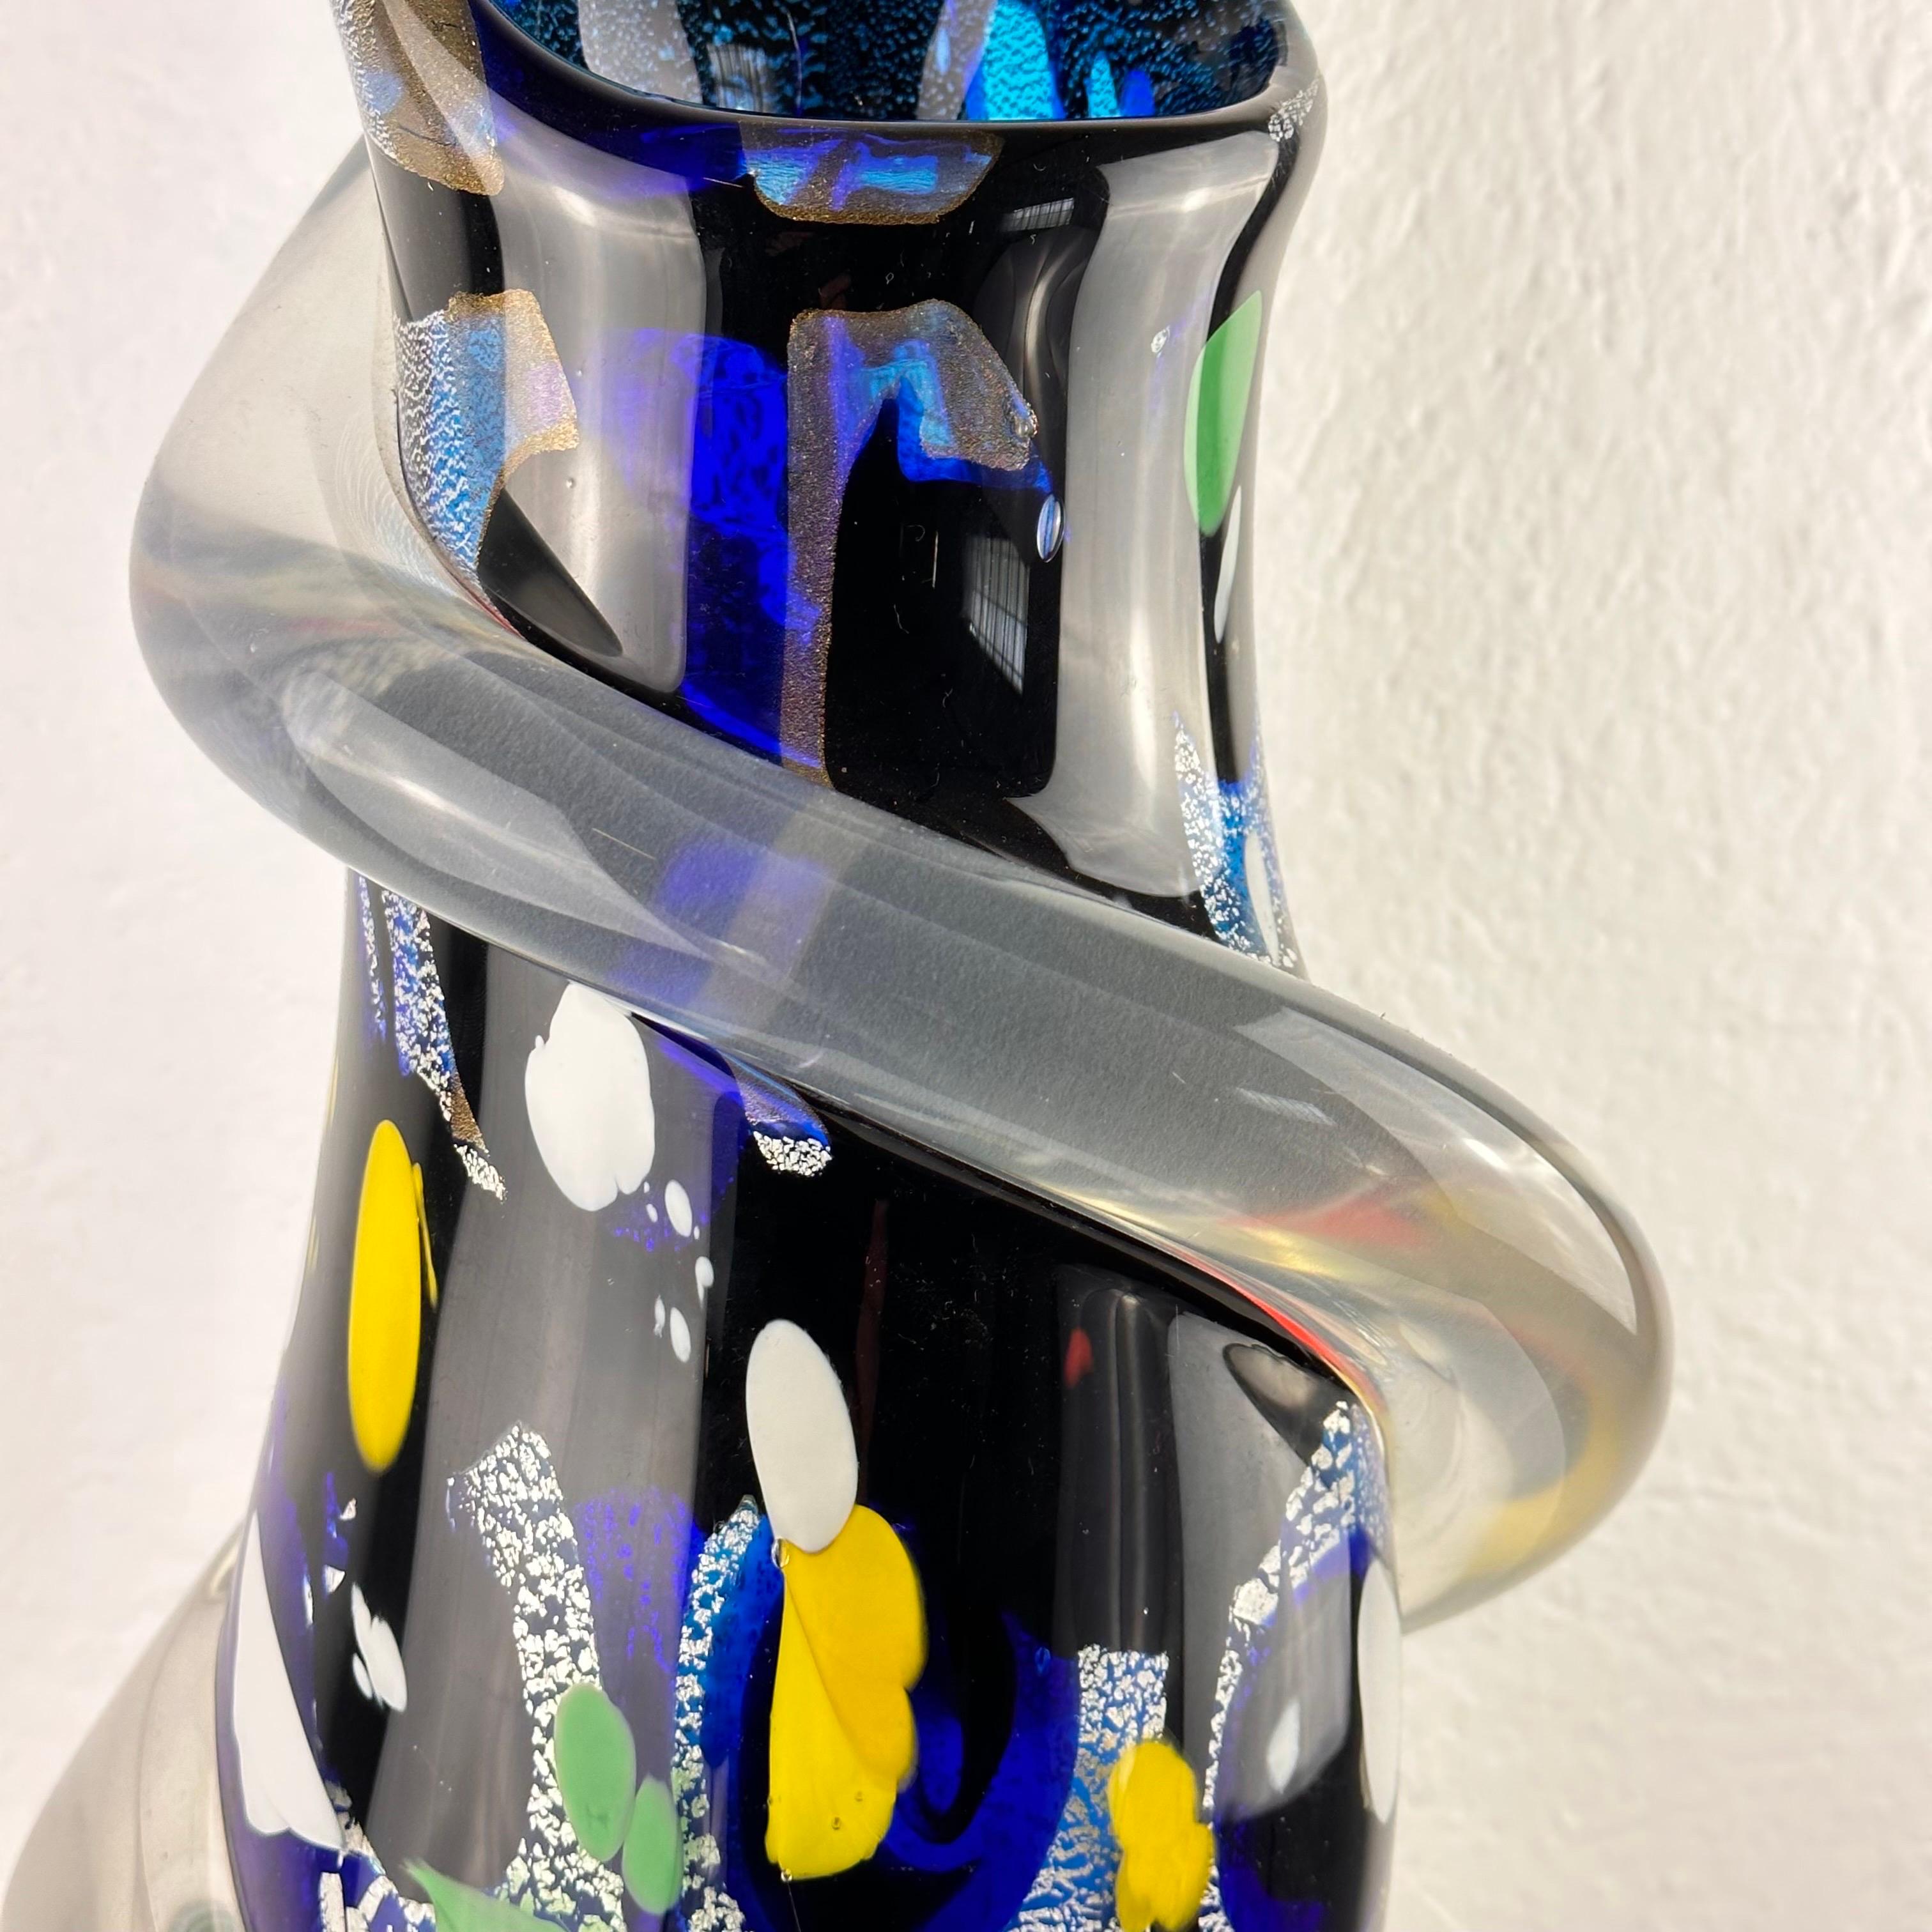 Exquisite Abstract Murano Glass Vase by S. Toso, Signed 1970s Masterpiece For Sale 4